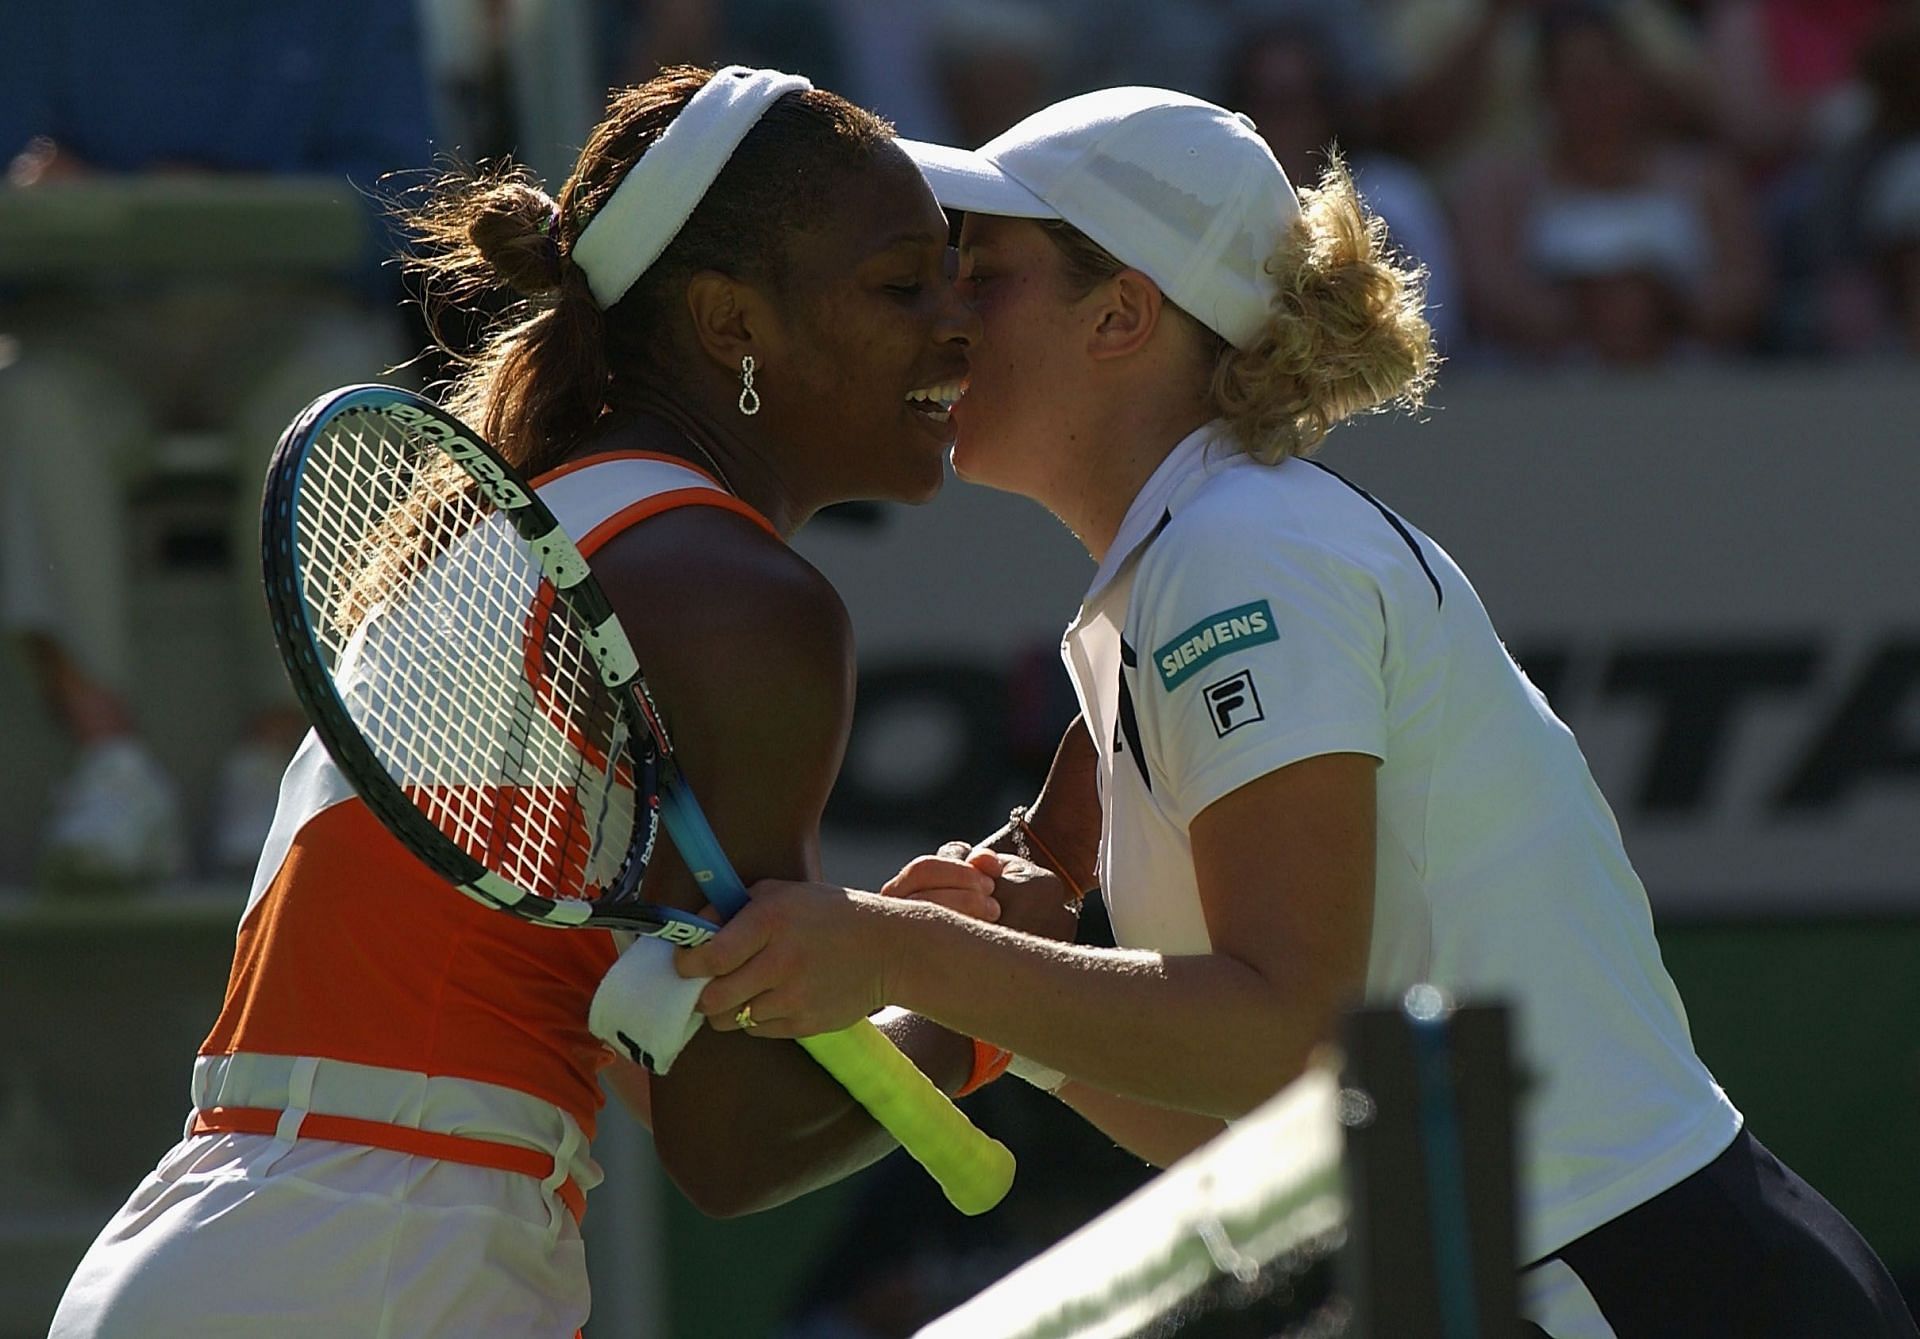 Serena Williams and Kim Clijsters at the 2003 Australian Open